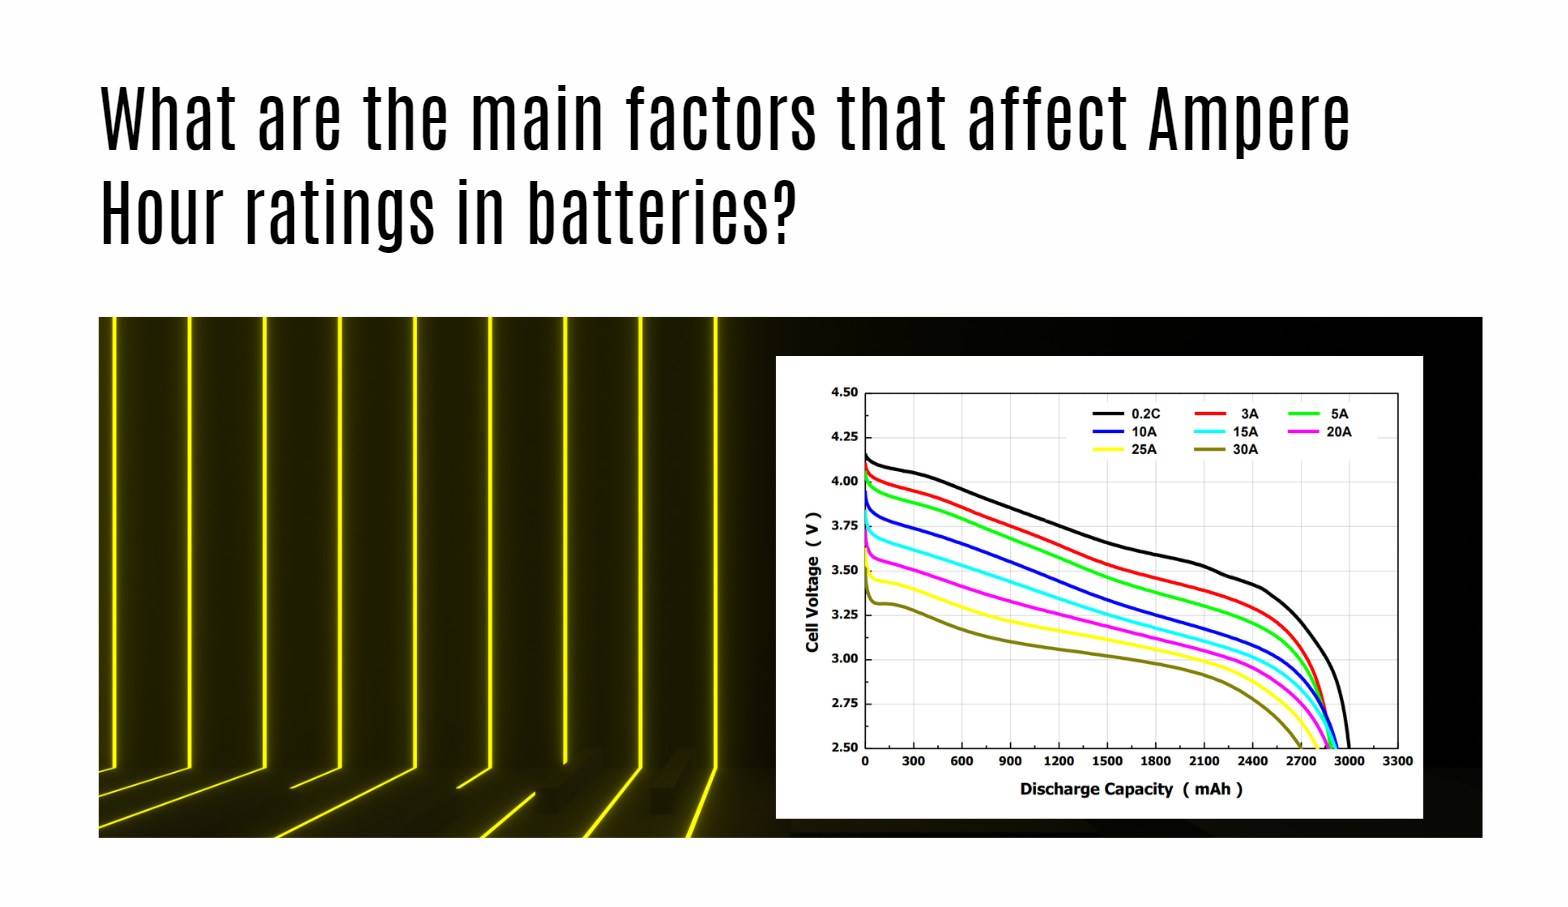 What are the main factors that affect Ampere Hour ratings in batteries?